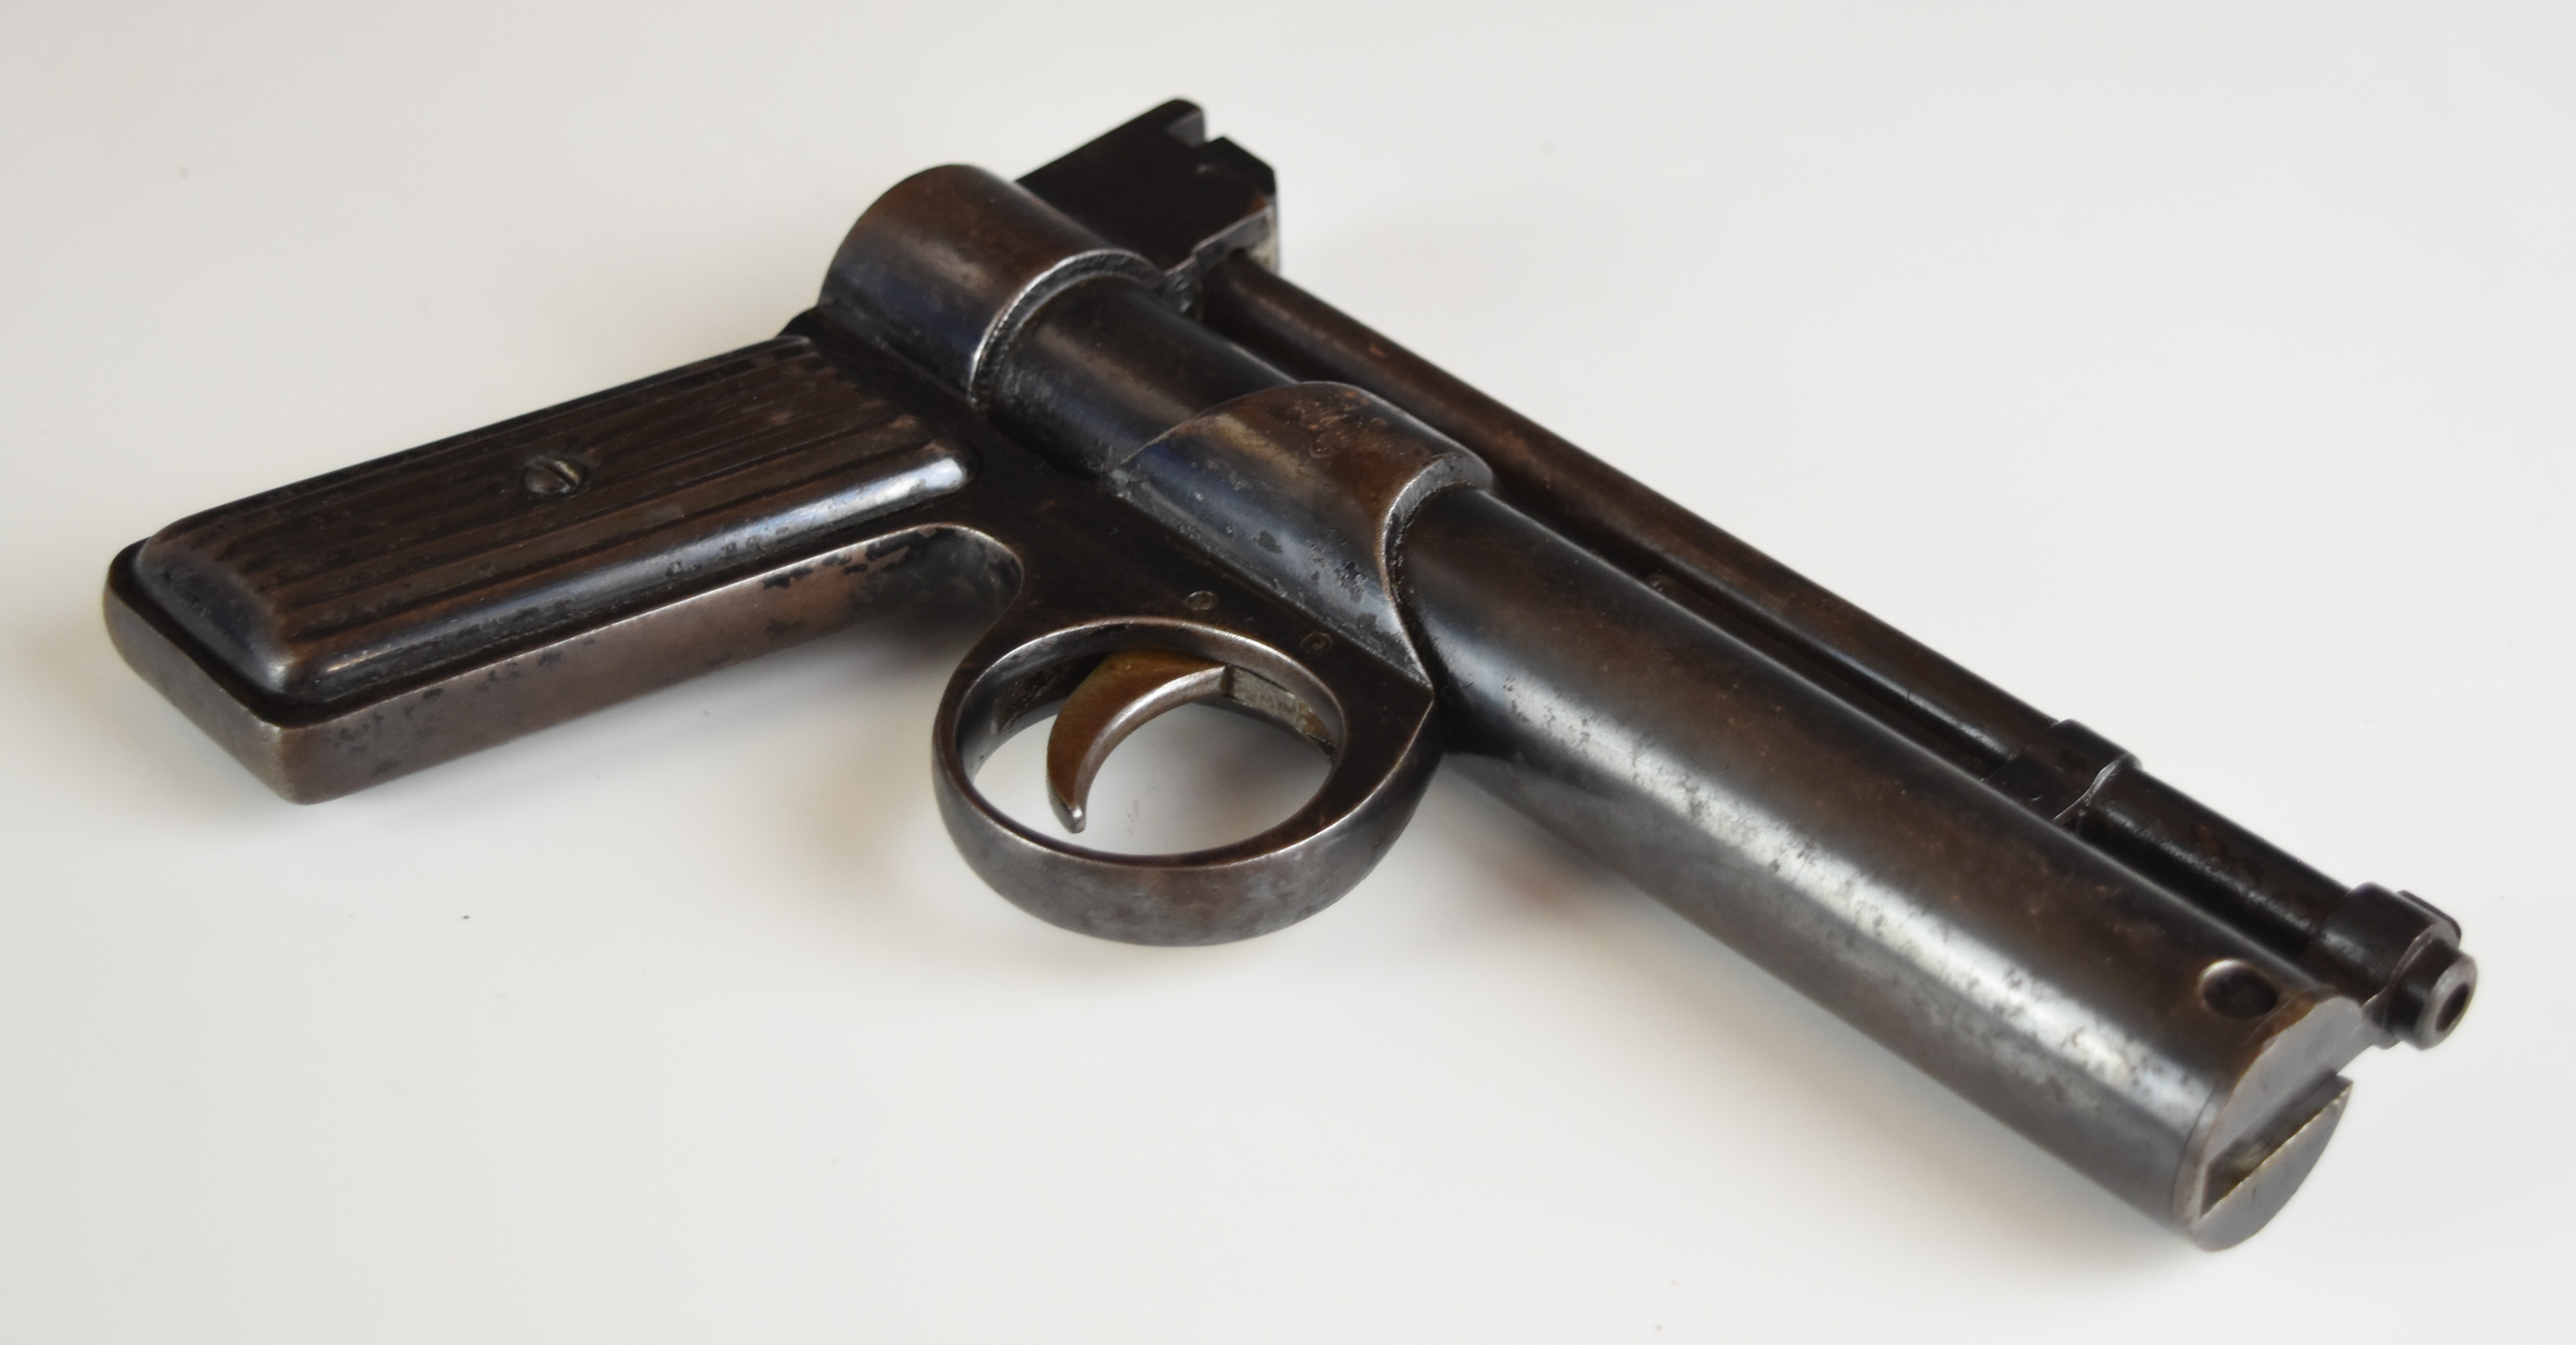 Webley Junior .177 air pistol with reeded metal grips and adjustable sights, serial number J34104. - Image 4 of 10